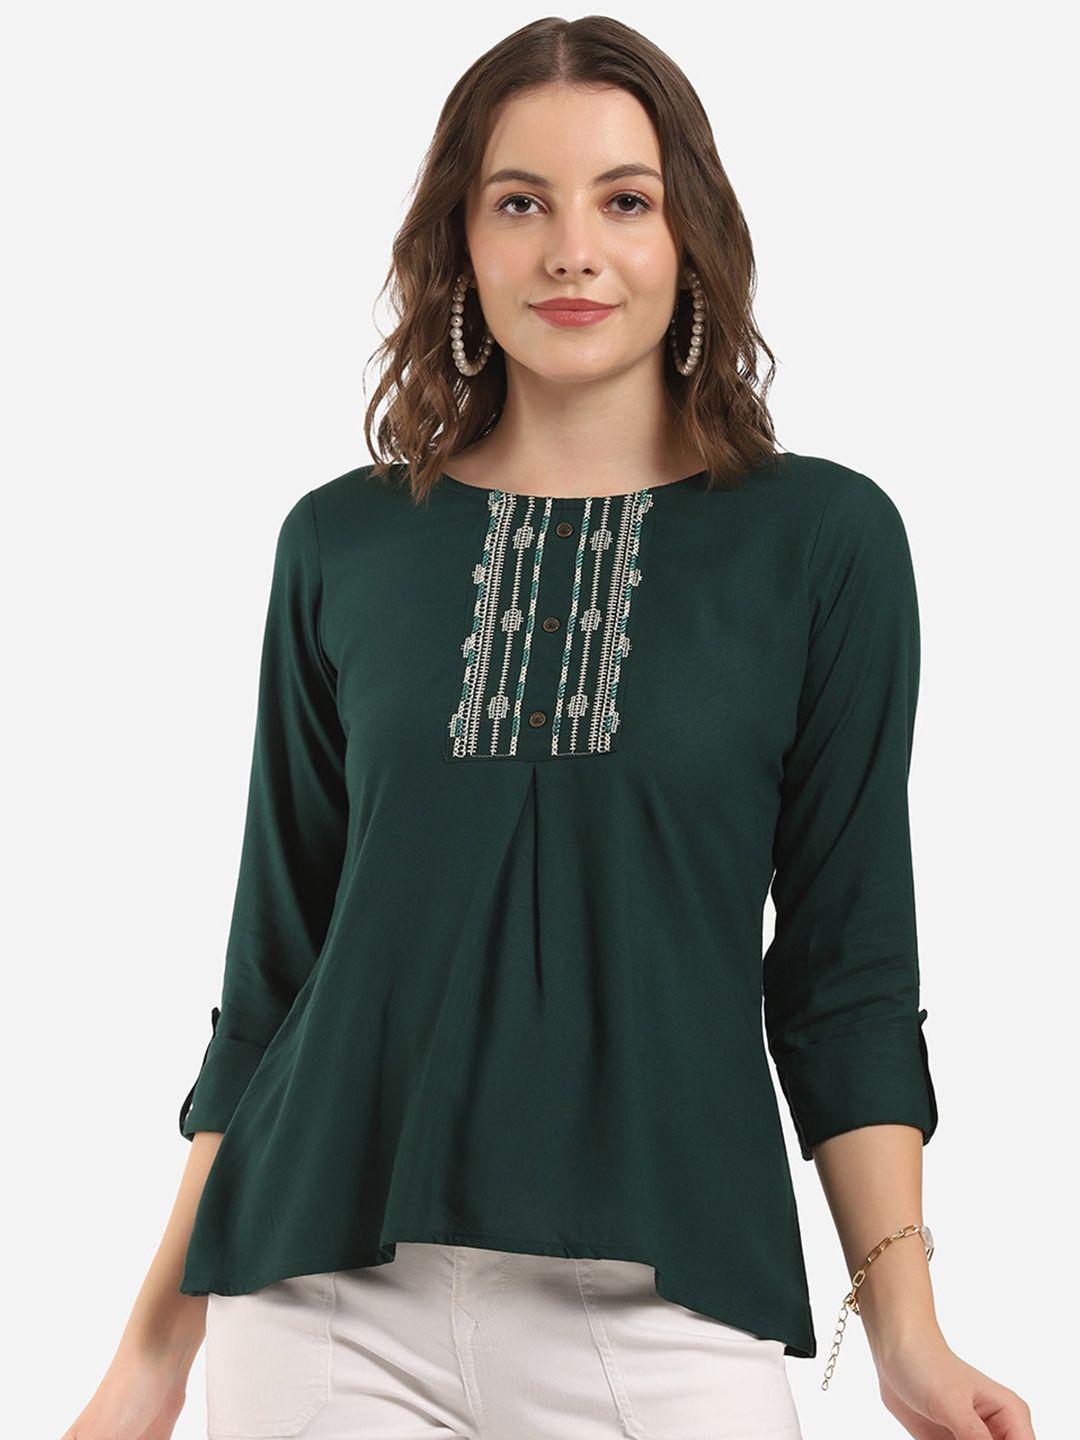 selvia green embroidered roll-up sleeves top